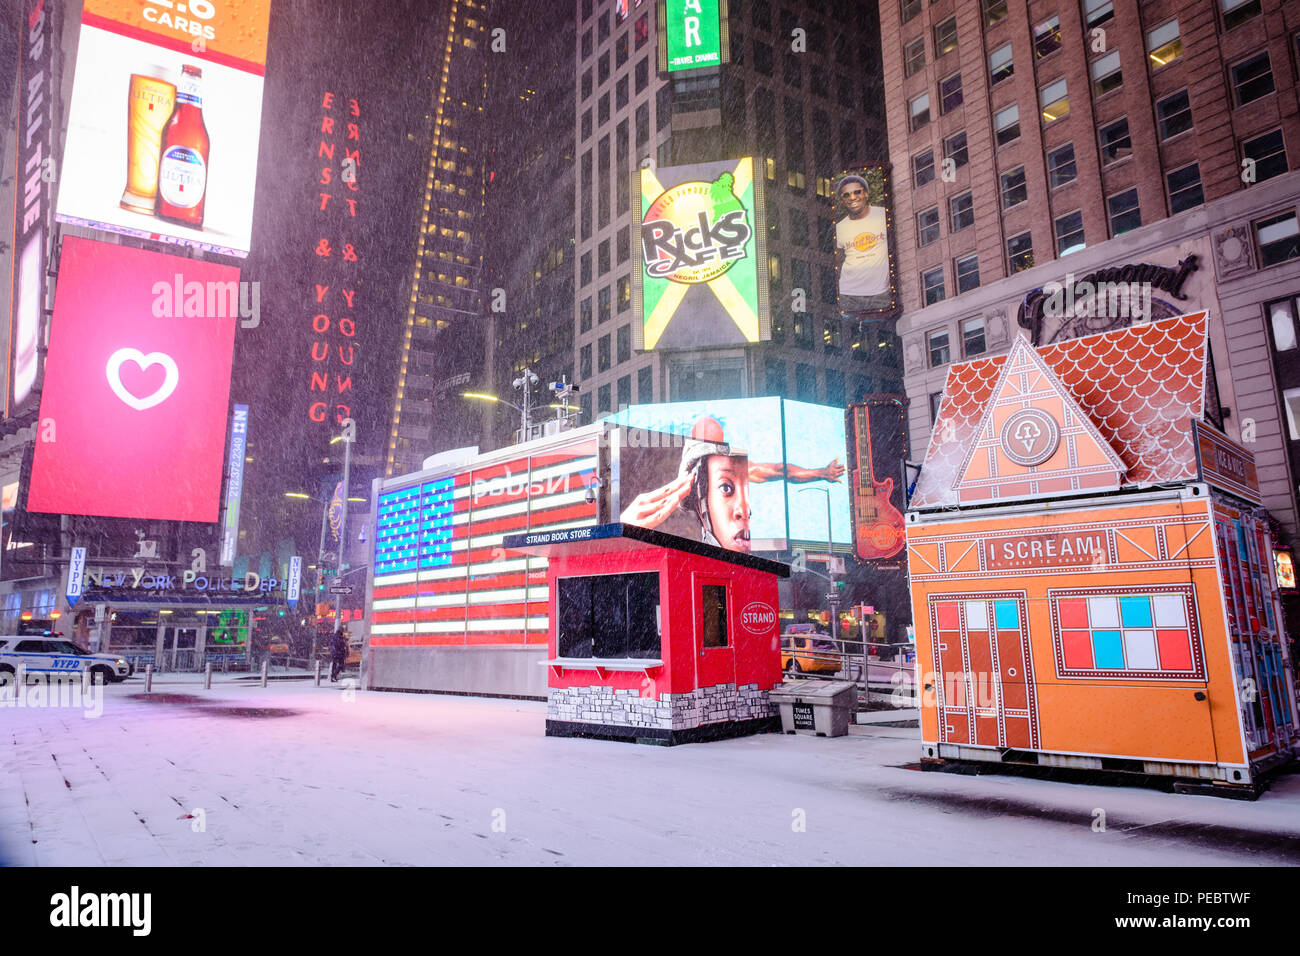 A snow covered sidewalk in Times Square, New York City during Winter Storm Grayson, January 2018. Stock Photo